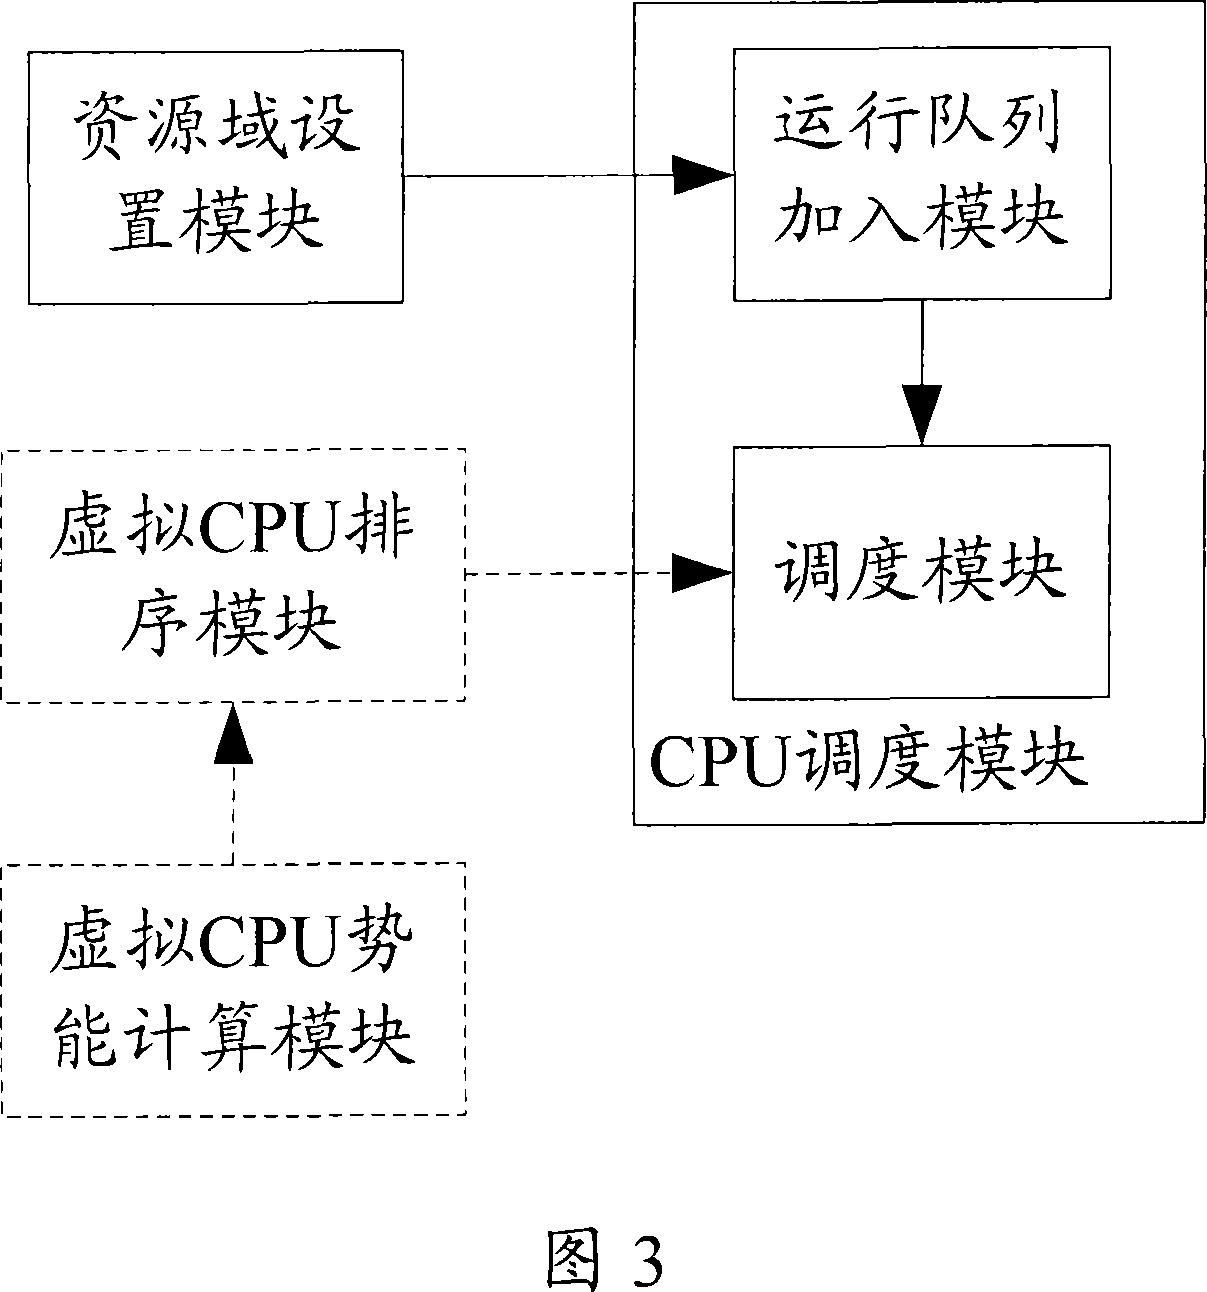 Multiple-path multiple-core server and its CPU virtualization processing method